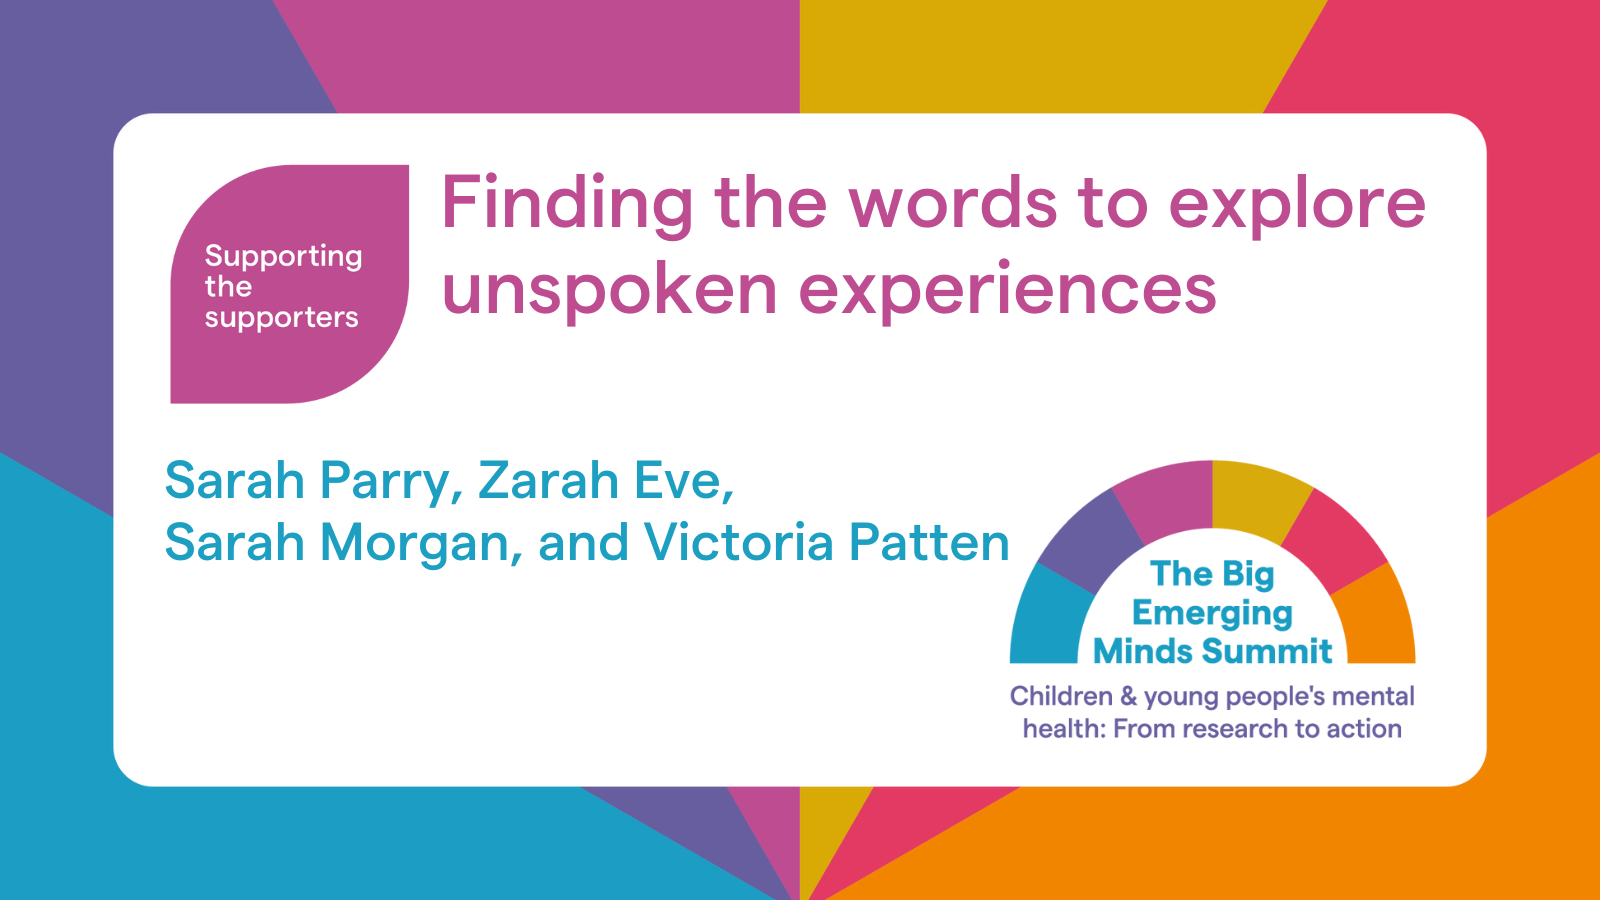 Finding the words to explore unspoken experiences